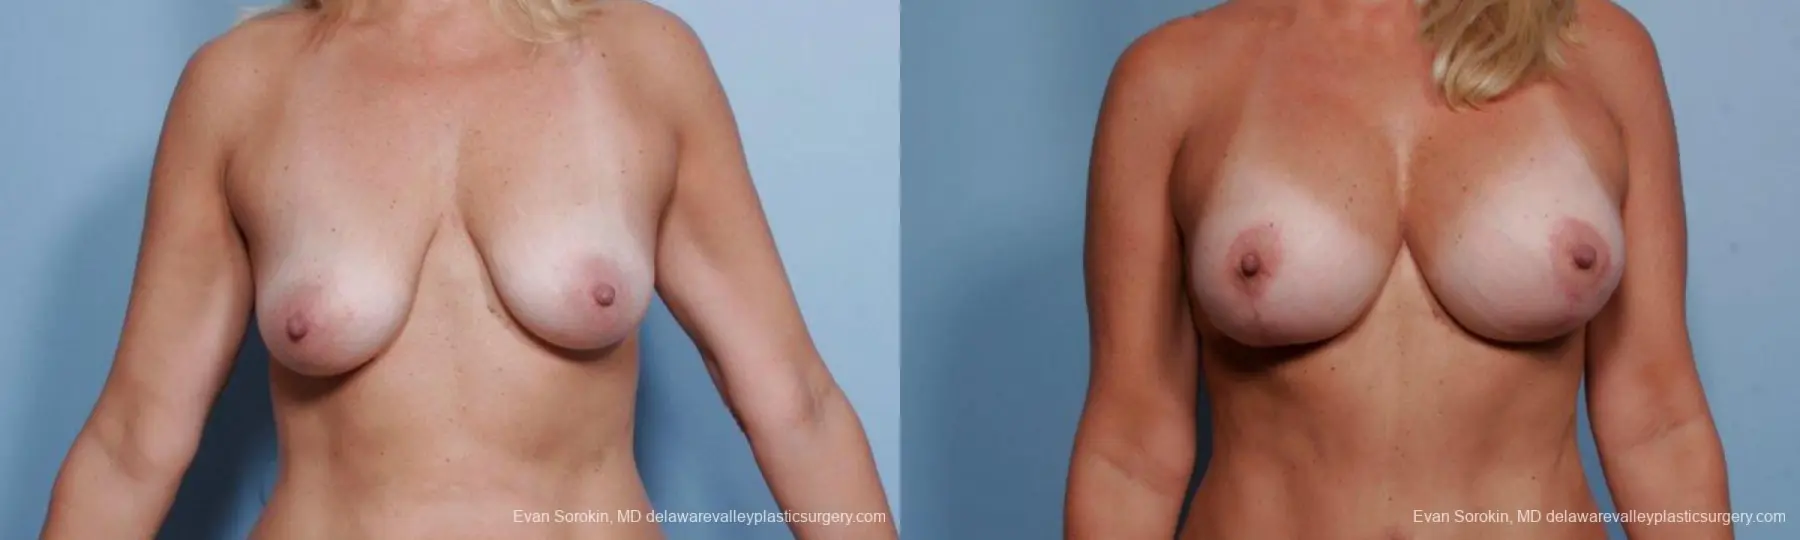 Philadelphia Breast Lift and Augmentation 9375 - Before and After 1